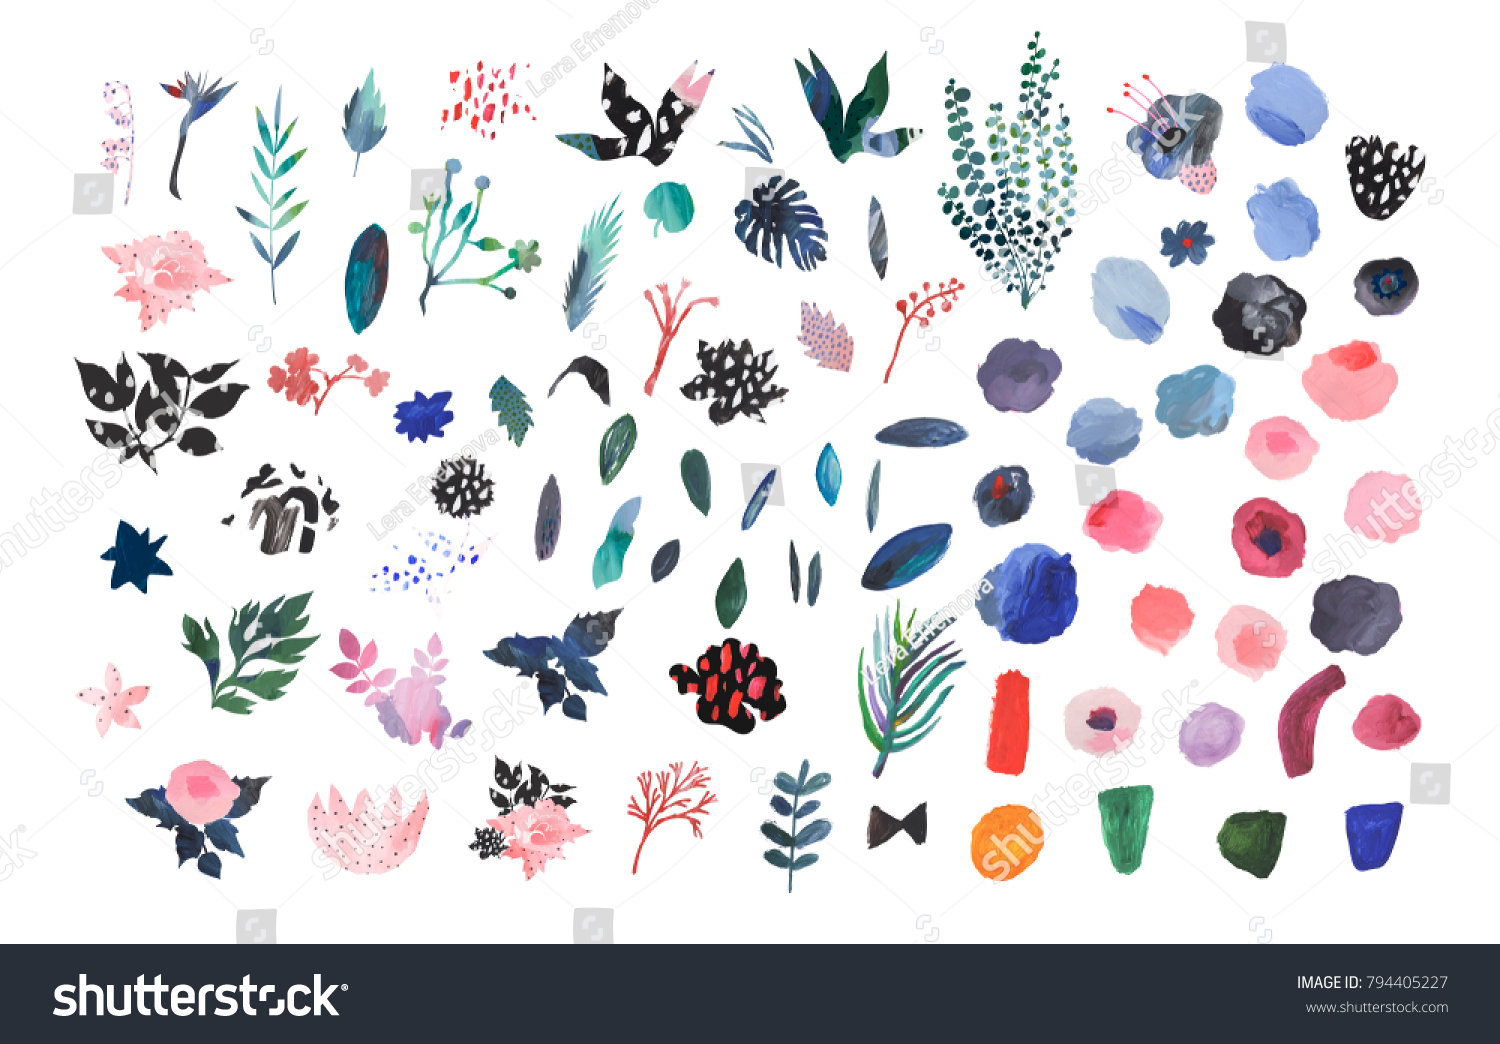 stock-photo-collection-of-hand-drawn-flowers-and-leaves-painted-art-set-794405227